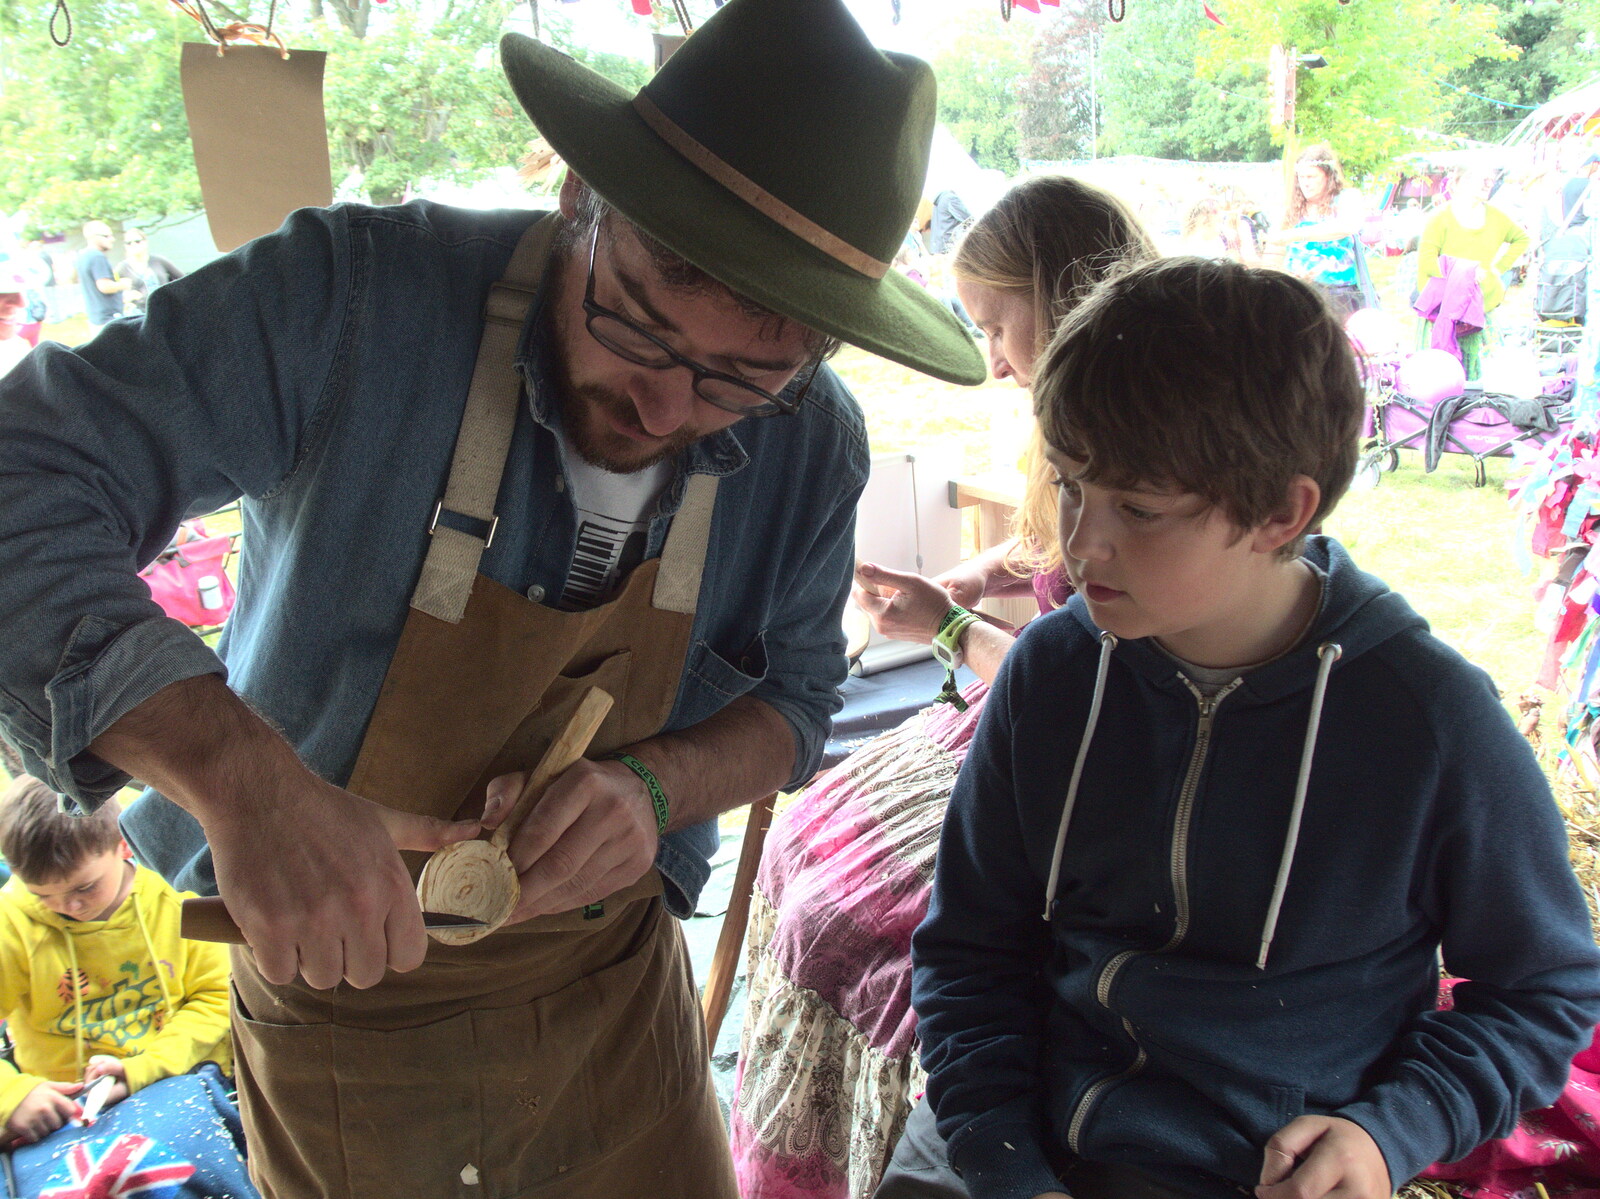 Fred learns some carving techniques from Maui Waui Festival, Hill Farm, Gressenhall, Norfolk - 28th August 2021